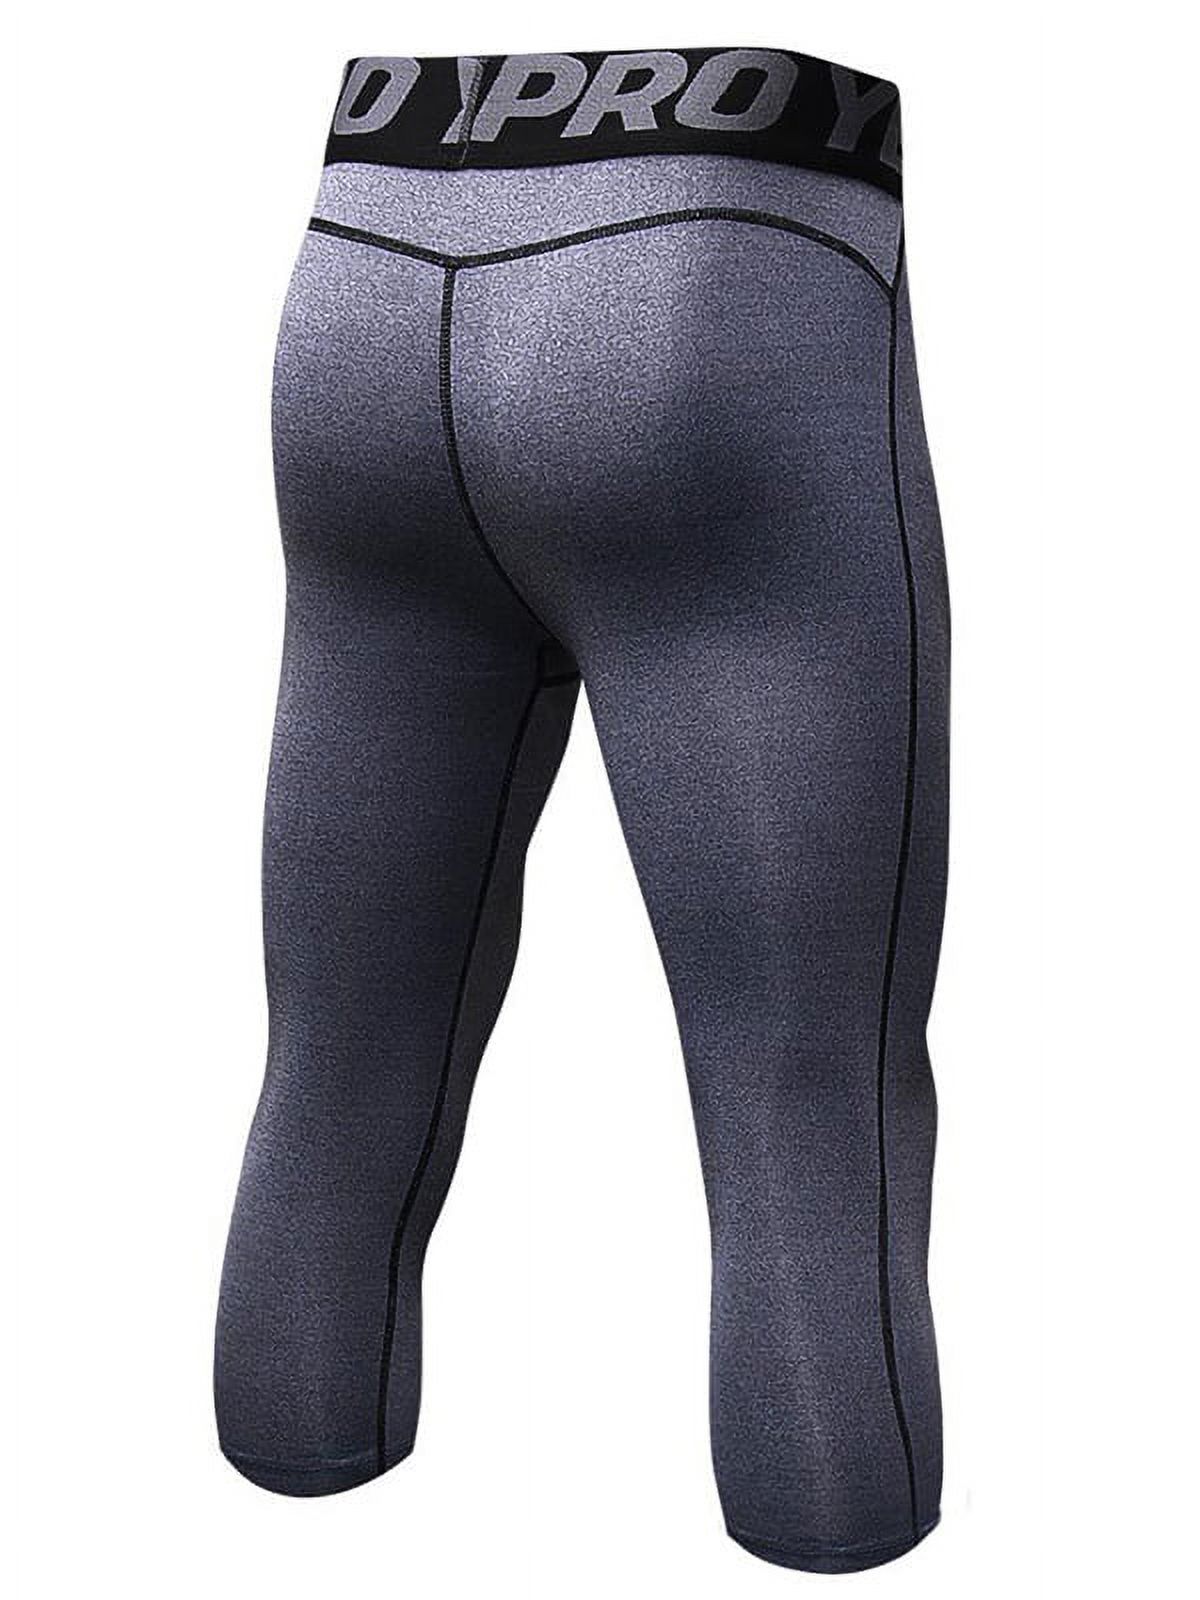 Men 3/4 Leggings Fitness Compression Sports Tights Base Layer Yoga Pants - image 2 of 2